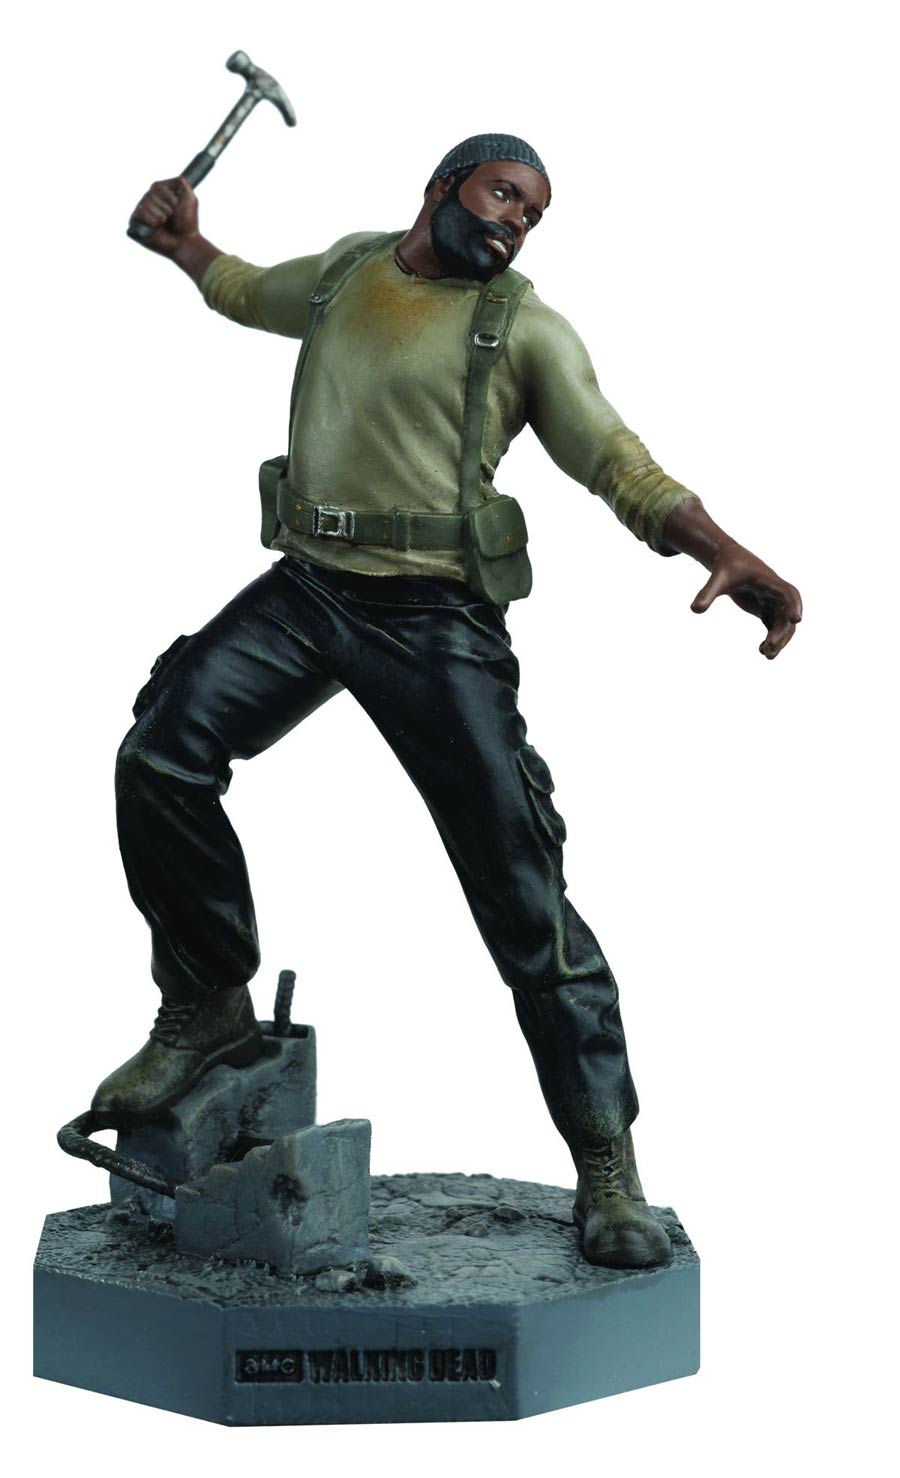 Walking Dead Figurine Collection Magazine #6 Tyreese Williams